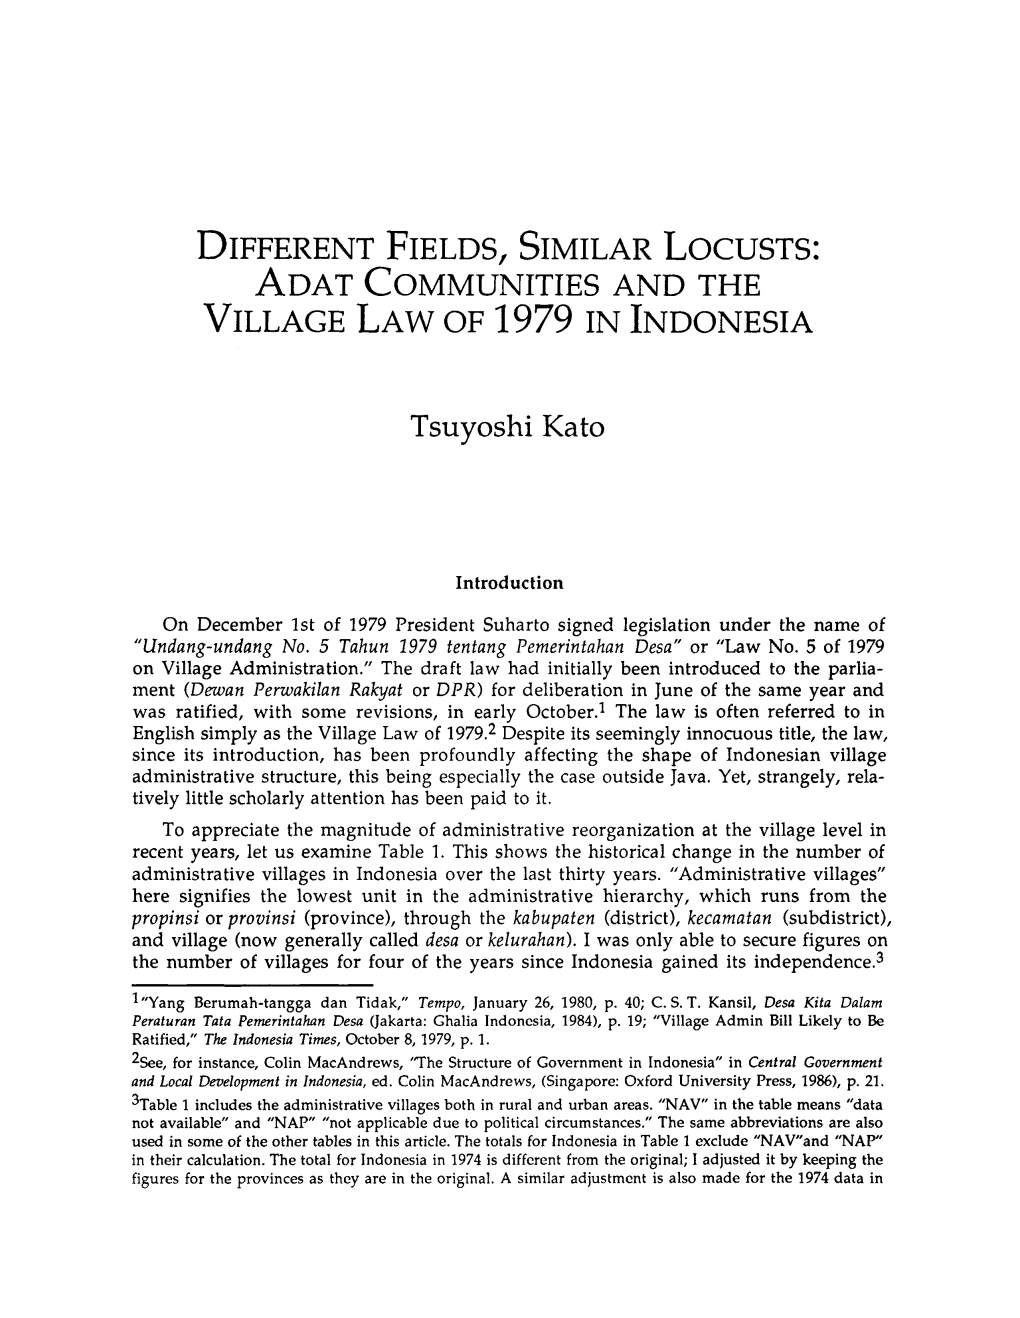 Adat Communities and the Village Law of 1979